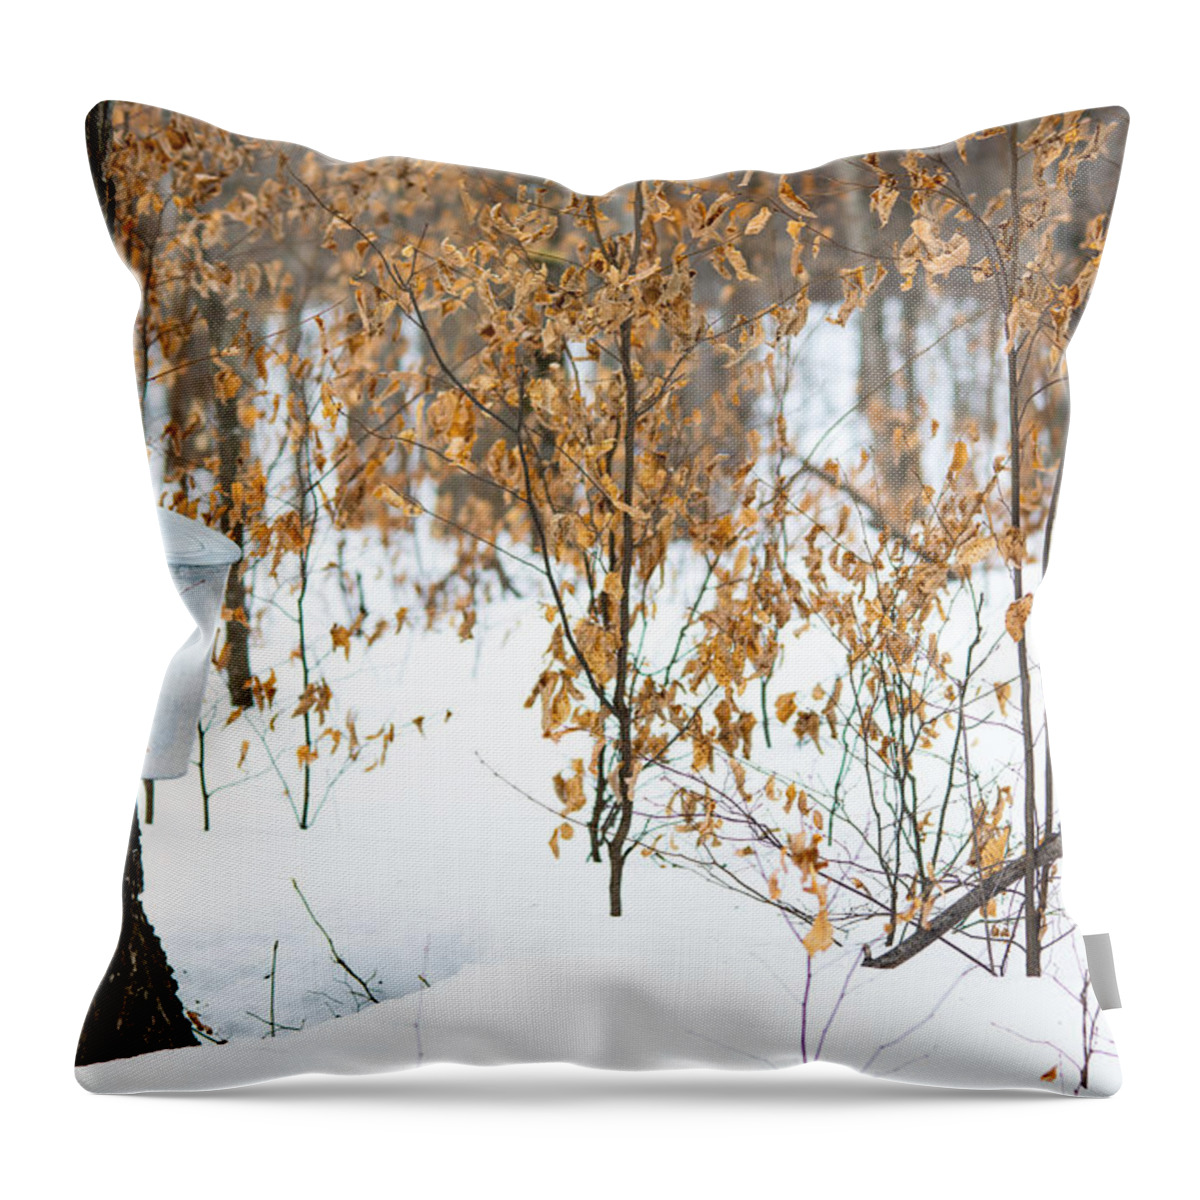 Landscape Throw Pillow featuring the photograph Maple Woods by Cheryl Baxter